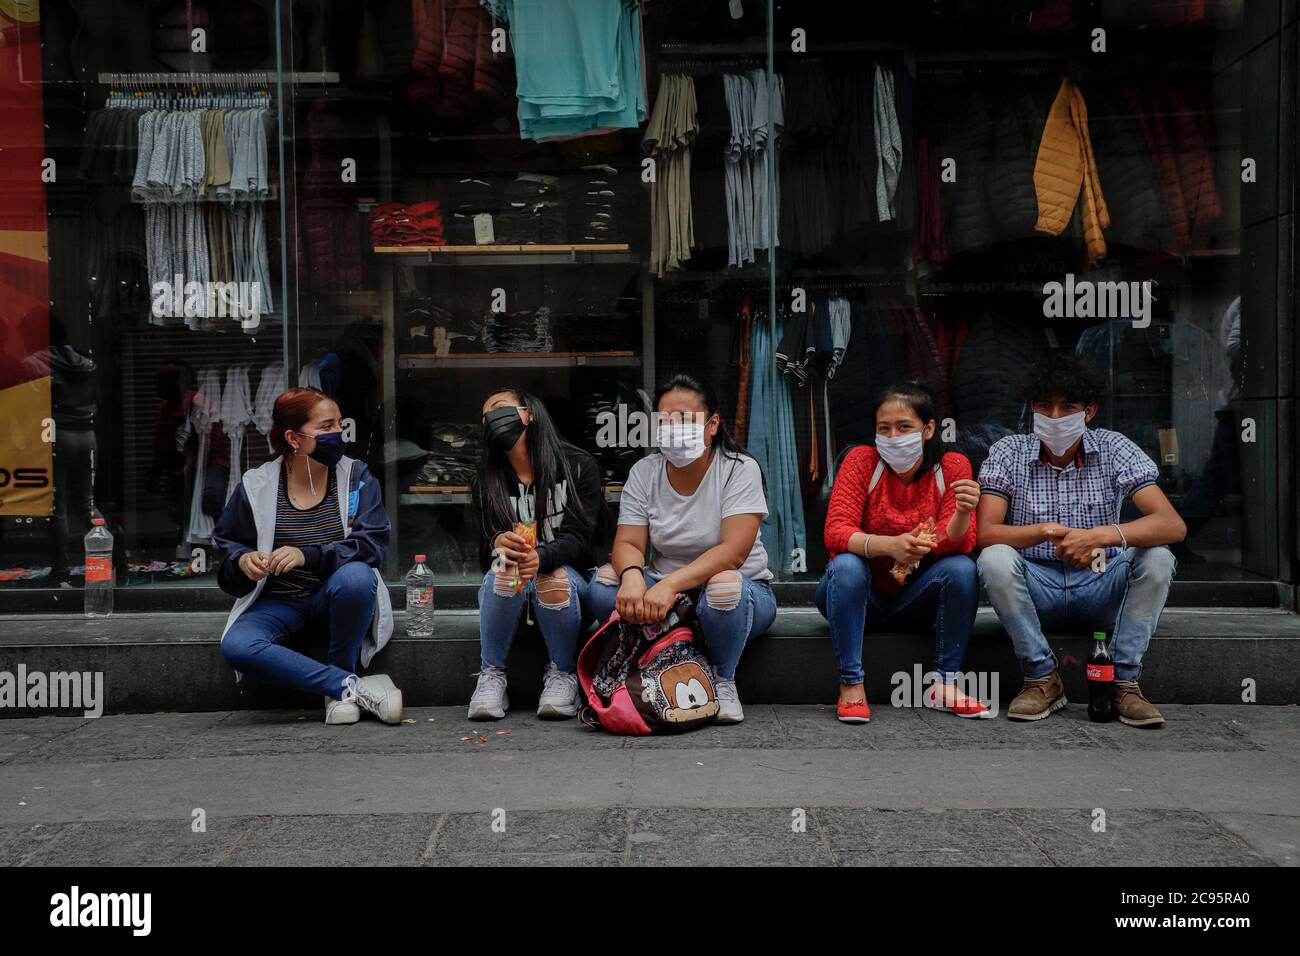 Mexico City, Mexico. 28th July, 2020. People are seen wearing masks in Mexico City, Mexico, July 28, 2020. Mexico registered 7,208 new COVID-19 cases, bringing the nationwide count to 402,697 cases, the health ministry said Tuesday. Credit: Str/Xinhua/Alamy Live News Stock Photo